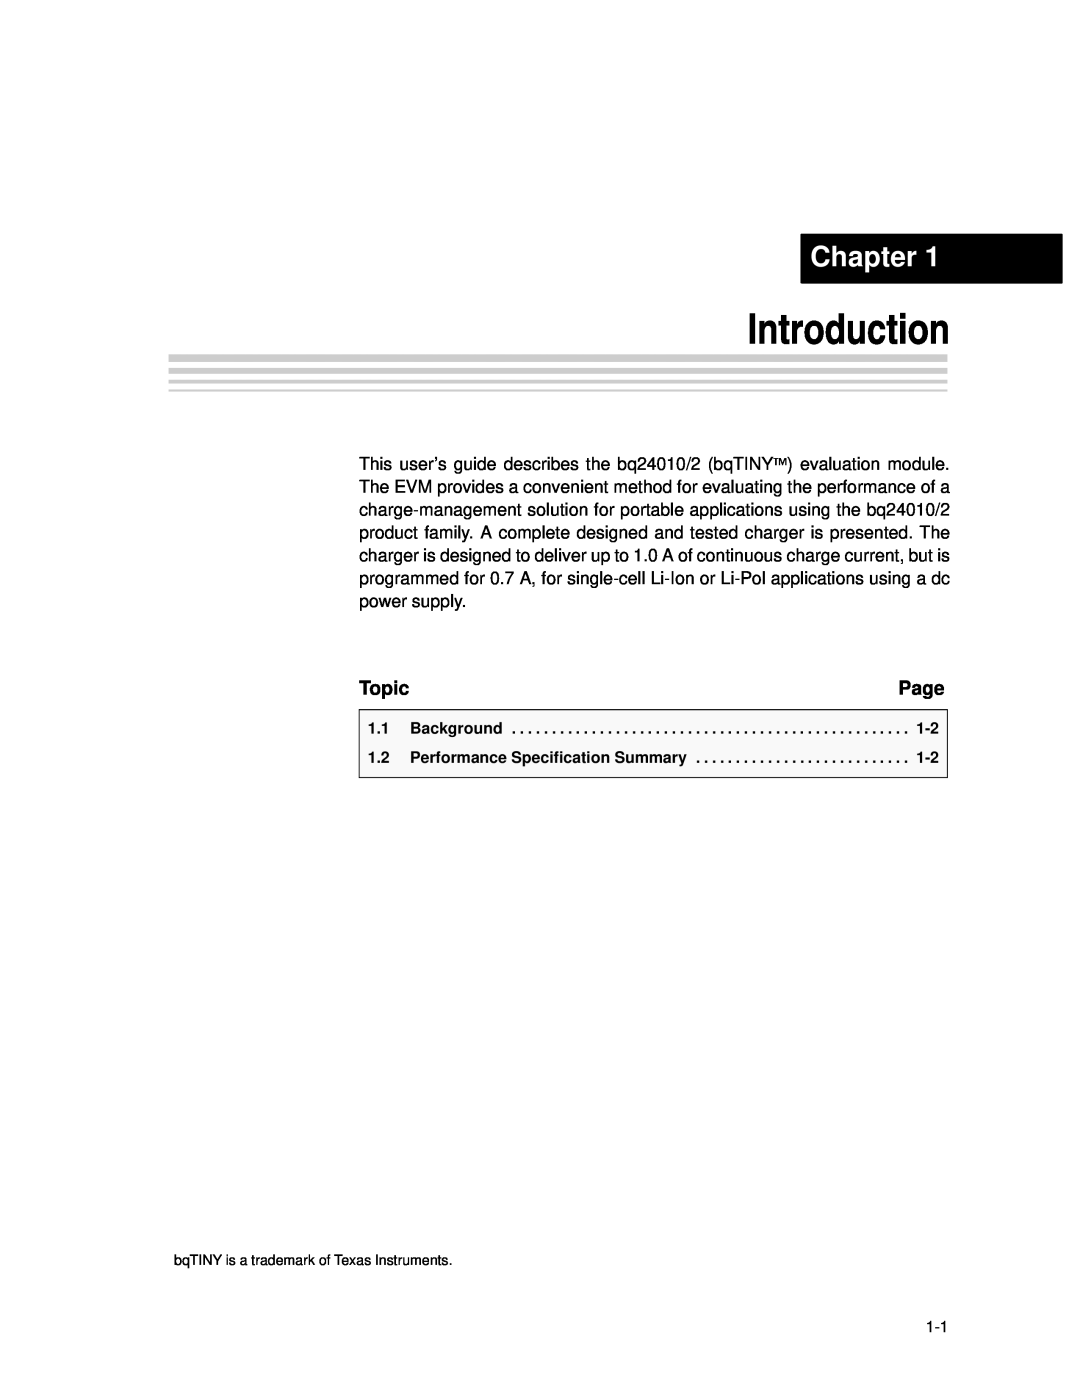 Texas Instruments bq24010/2 manual Introduction, Chapter, Page, Topic 